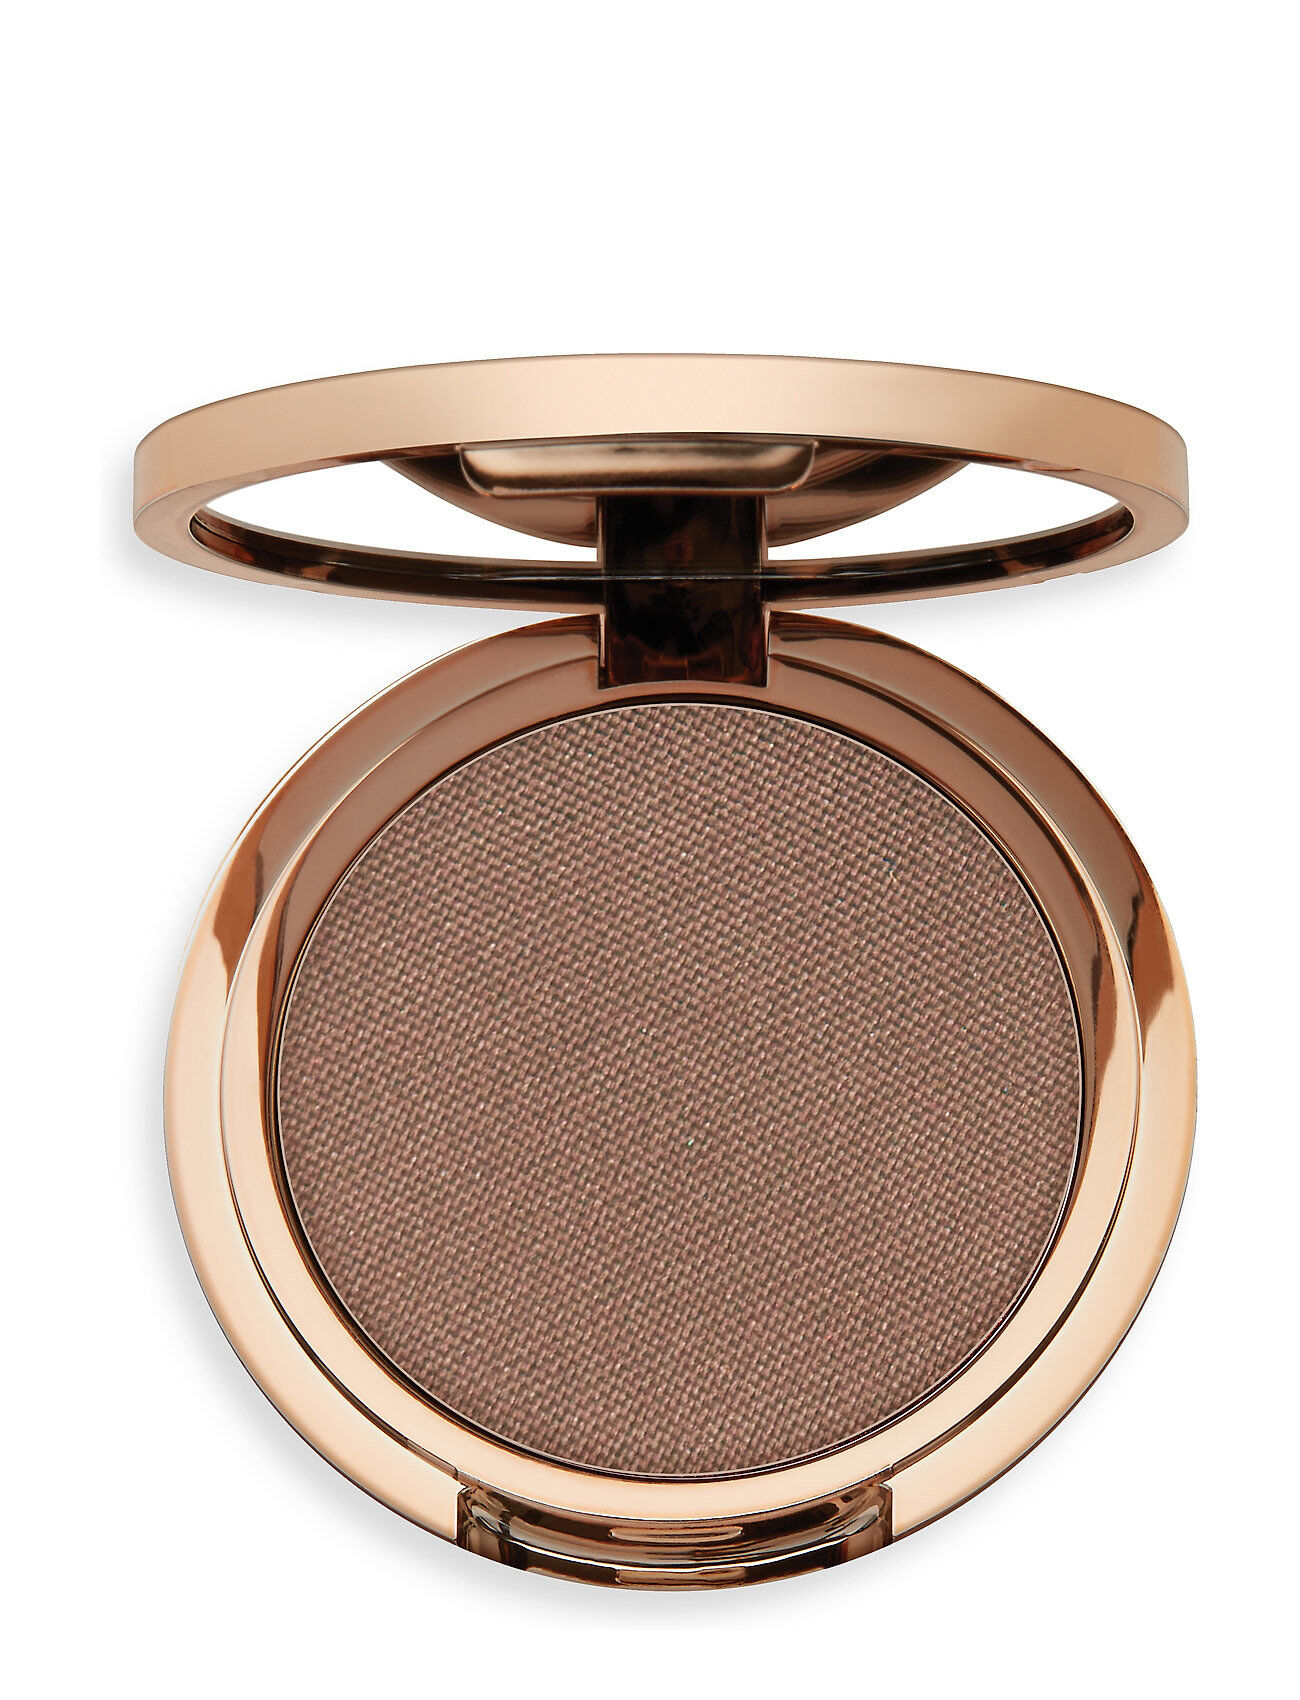 Nude by Nature Pressed Eyeshadow 03Driftwood Beauty WOMEN Makeup Eyes Eyeshadow - Not Palettes Brun Nude By Nature